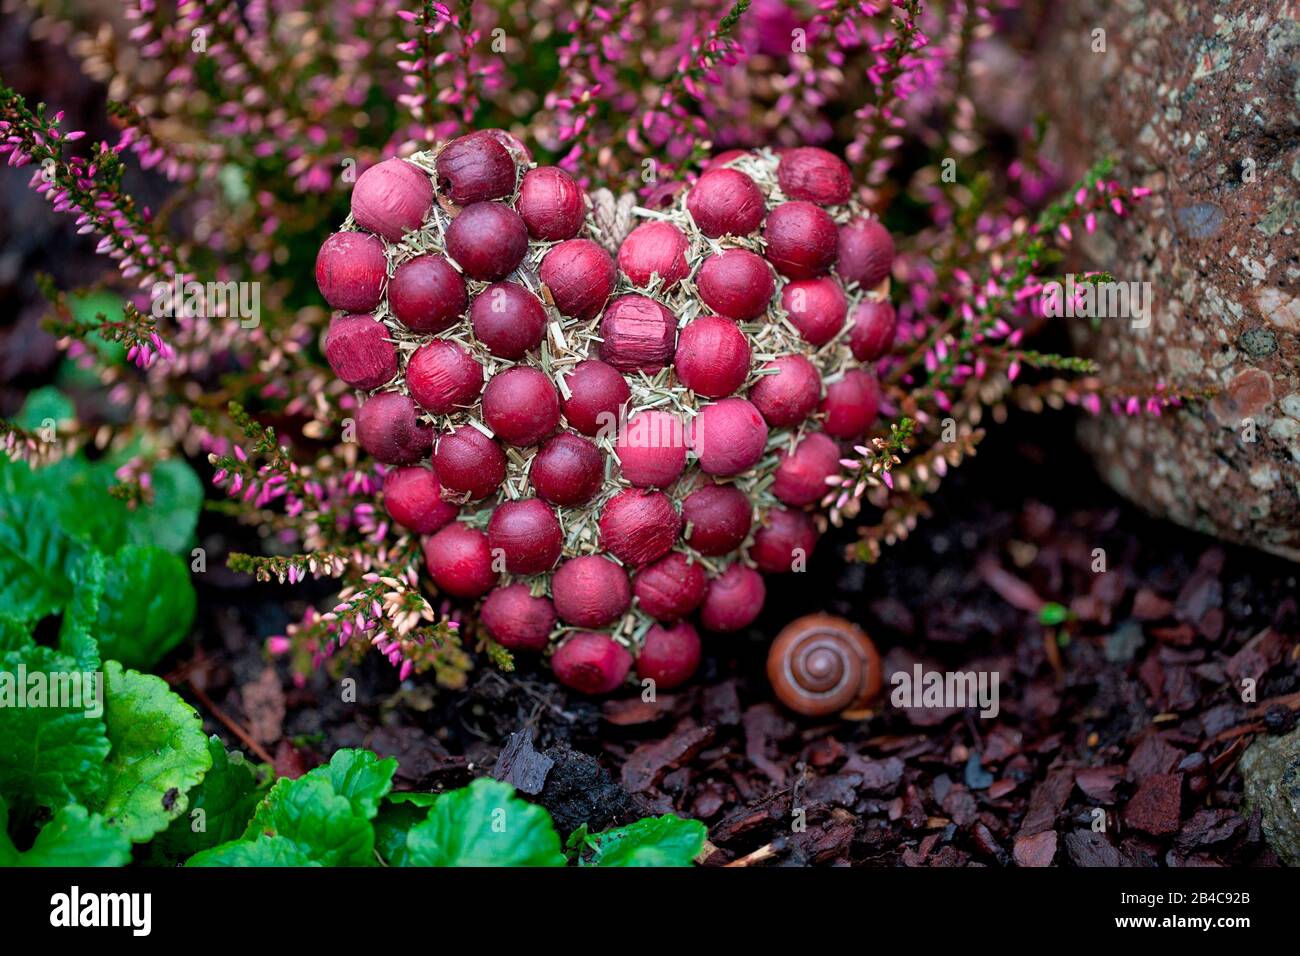 Autumn heart made of red berries still life with heather flowers Stock Photo